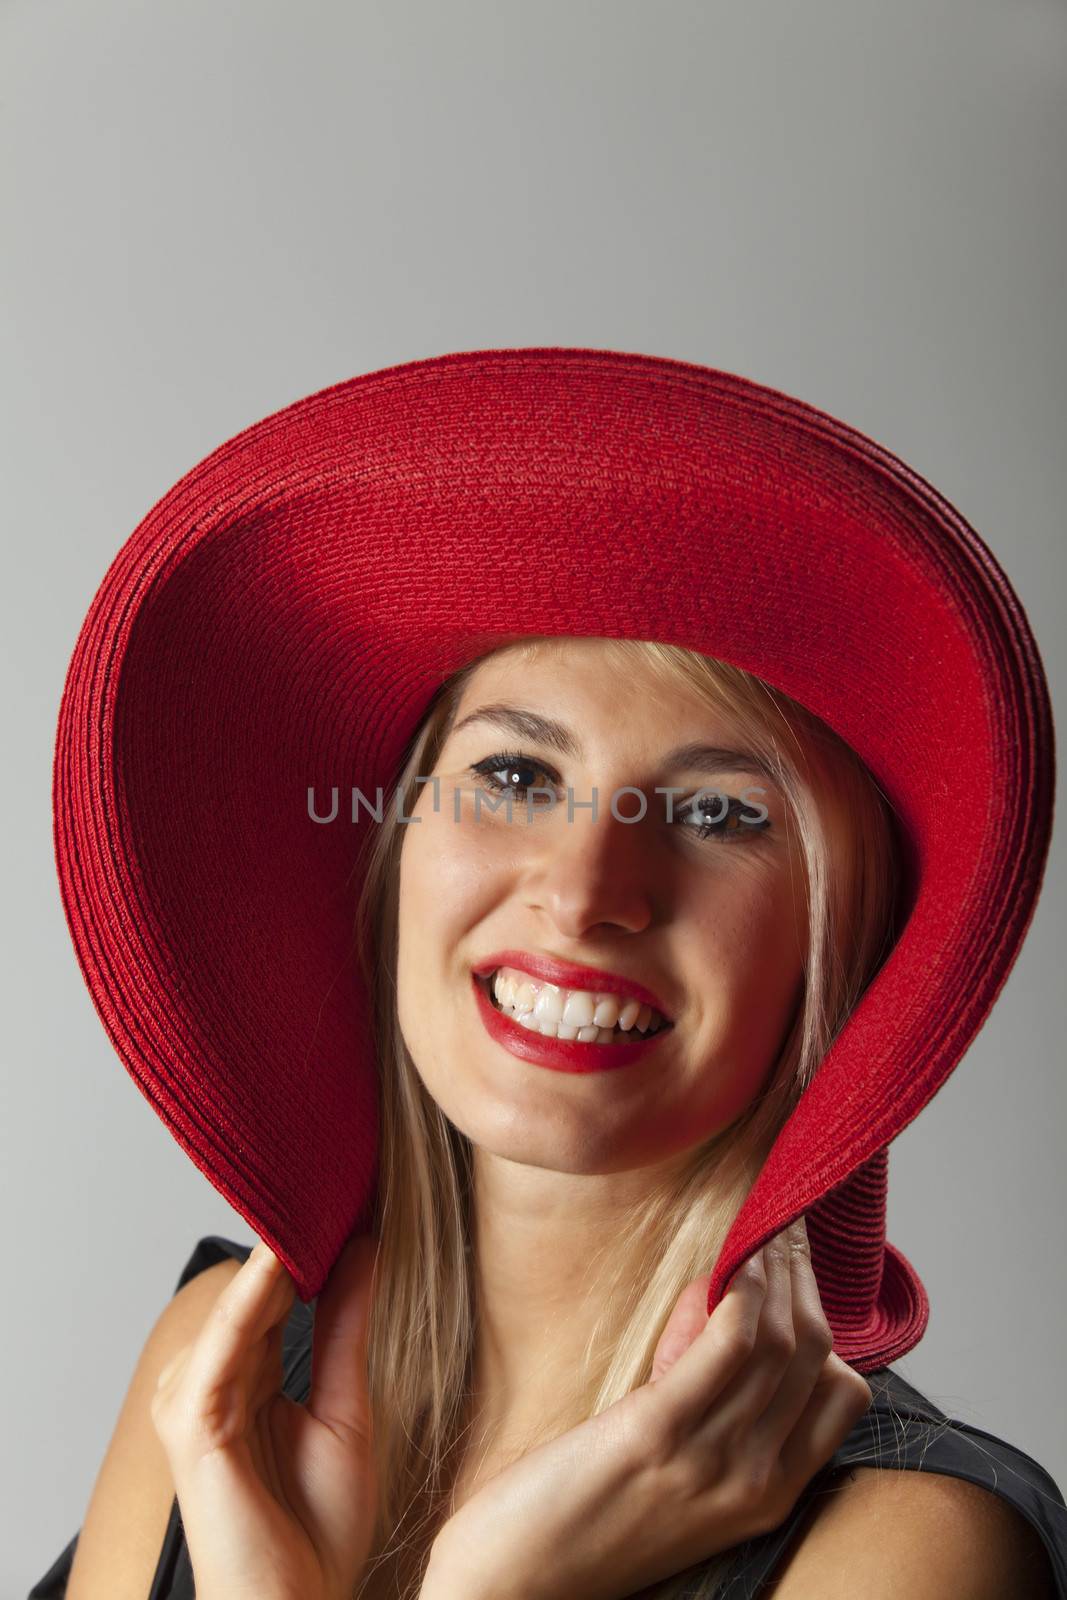 smiling woman with a hat